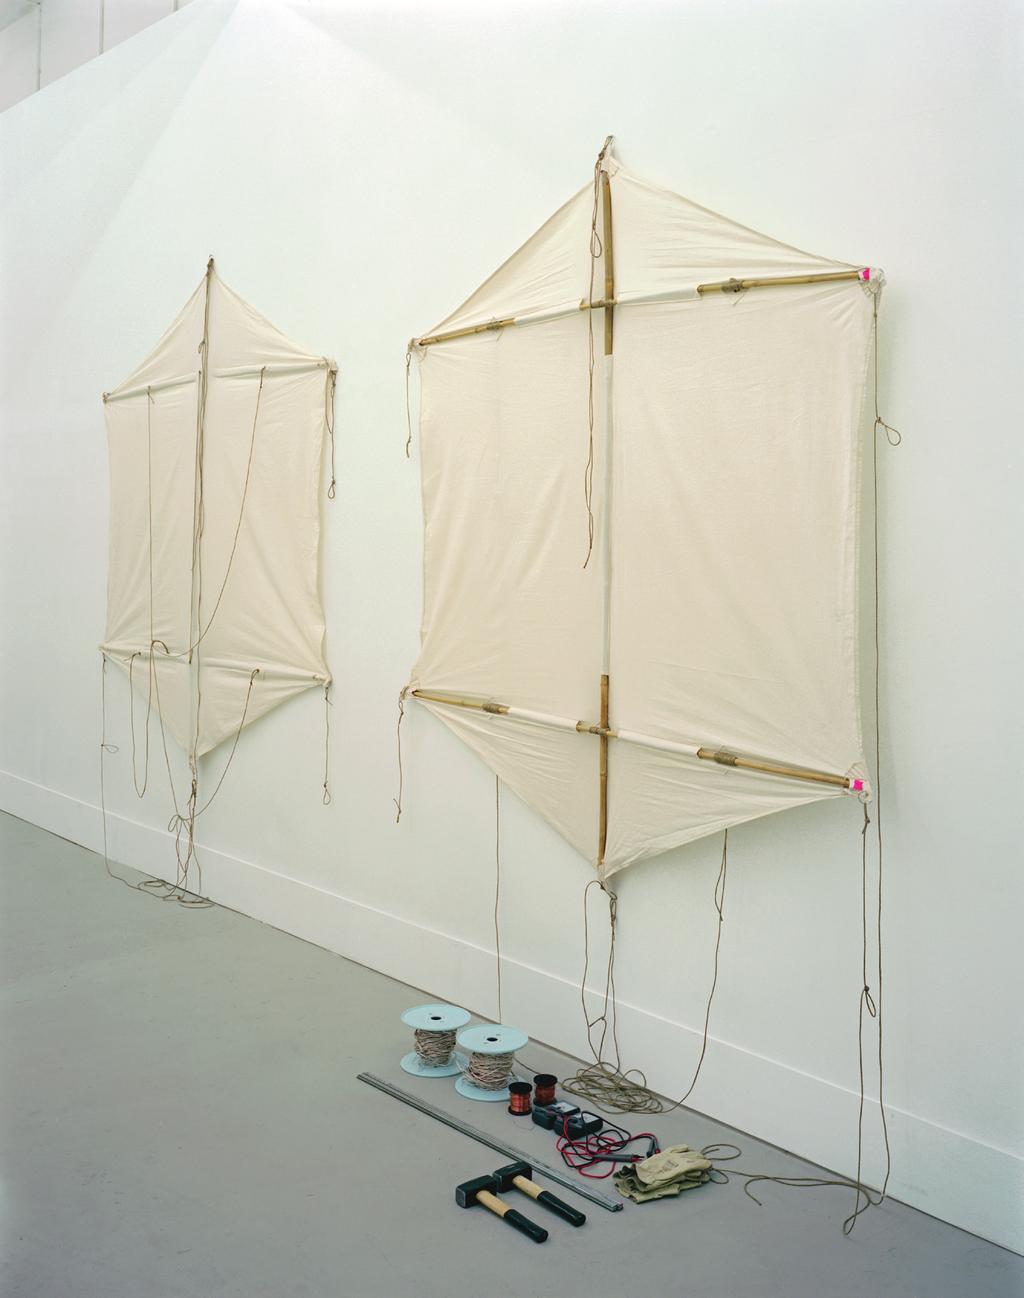 Laurent Montaron, The invisible message, 2011 Two kites, rods, copper